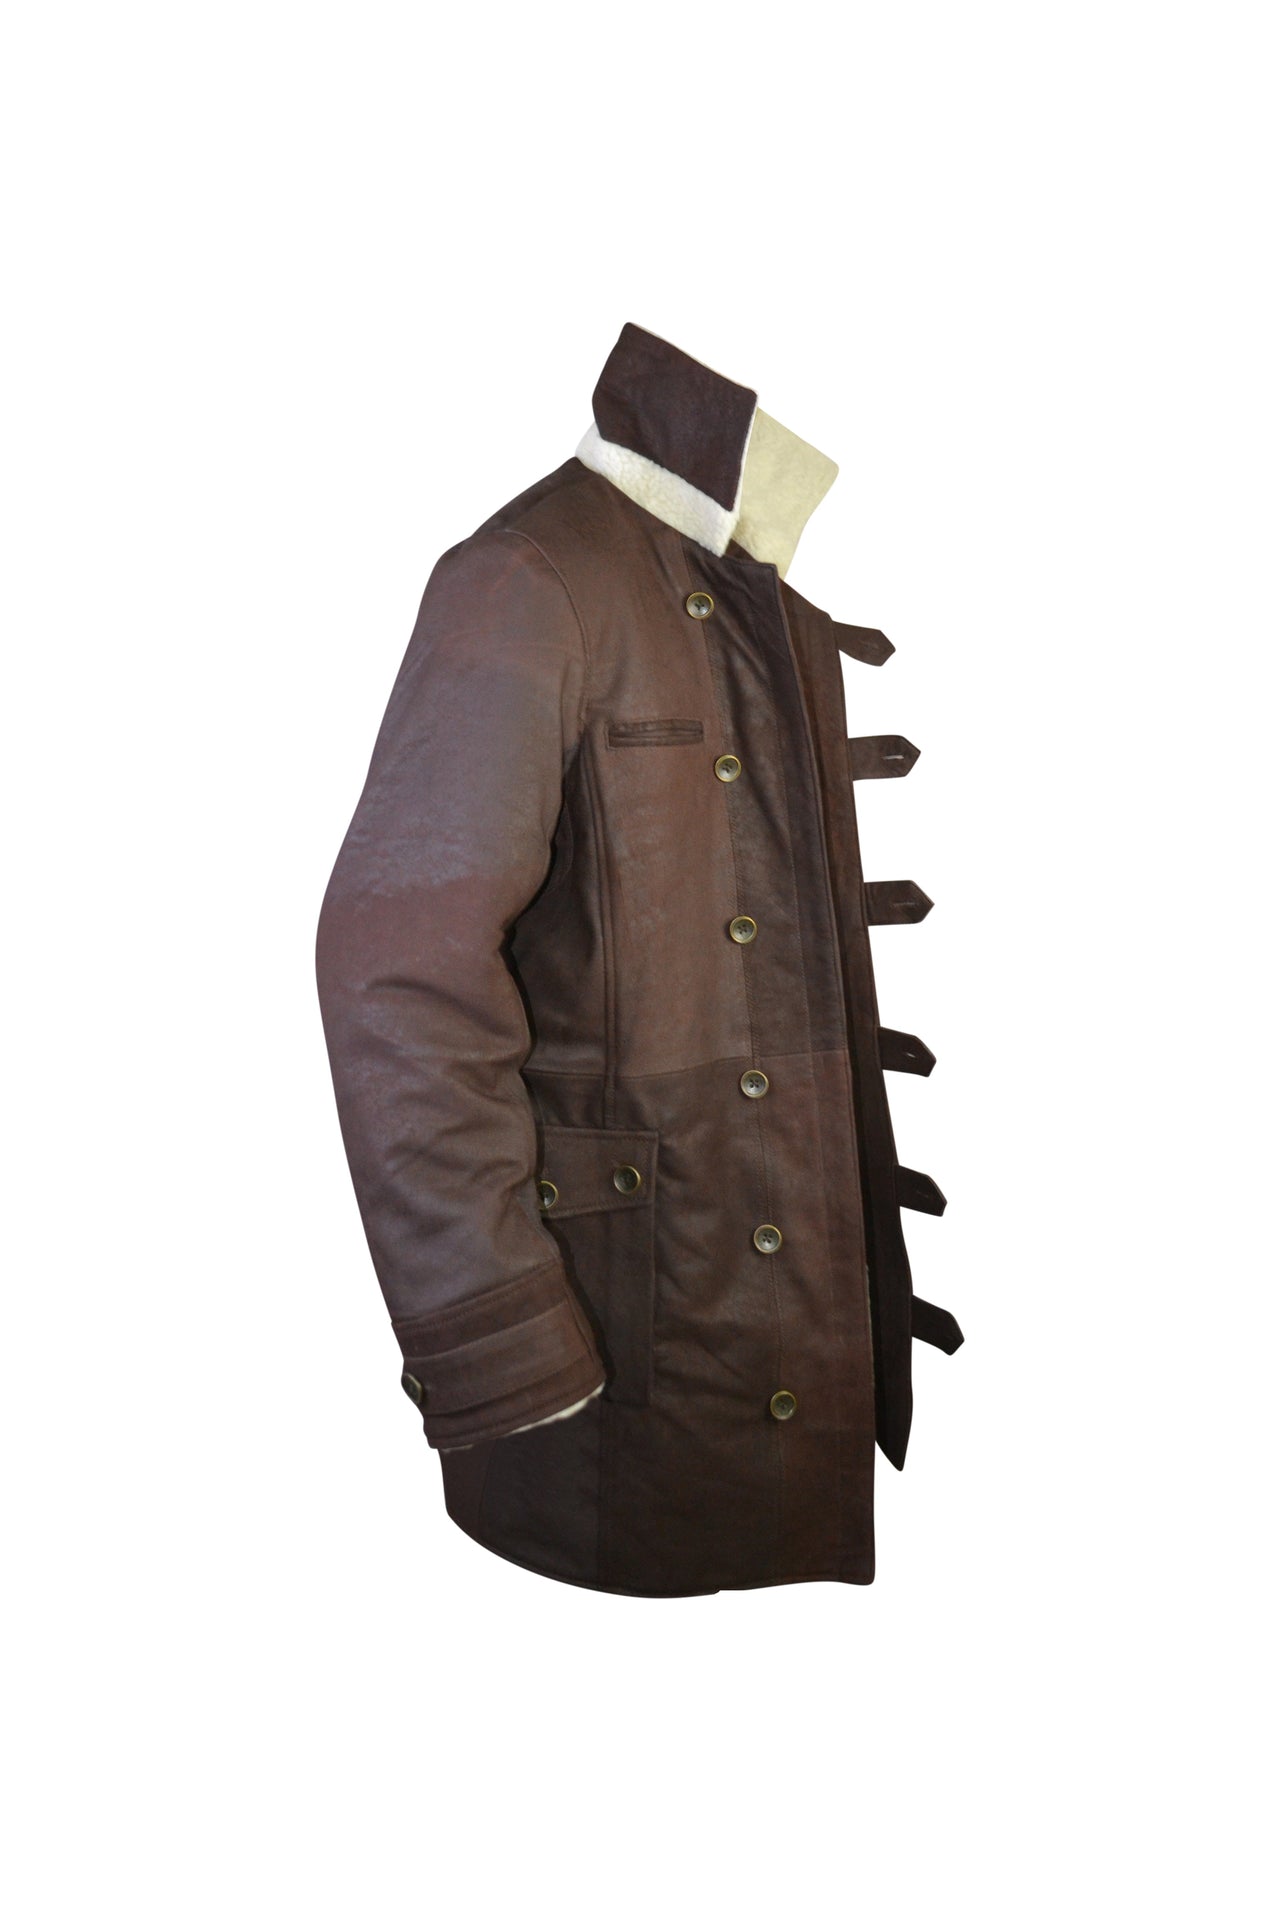 Mens Shearling Fur Brown Distressed Genuine Trench Leather Coat